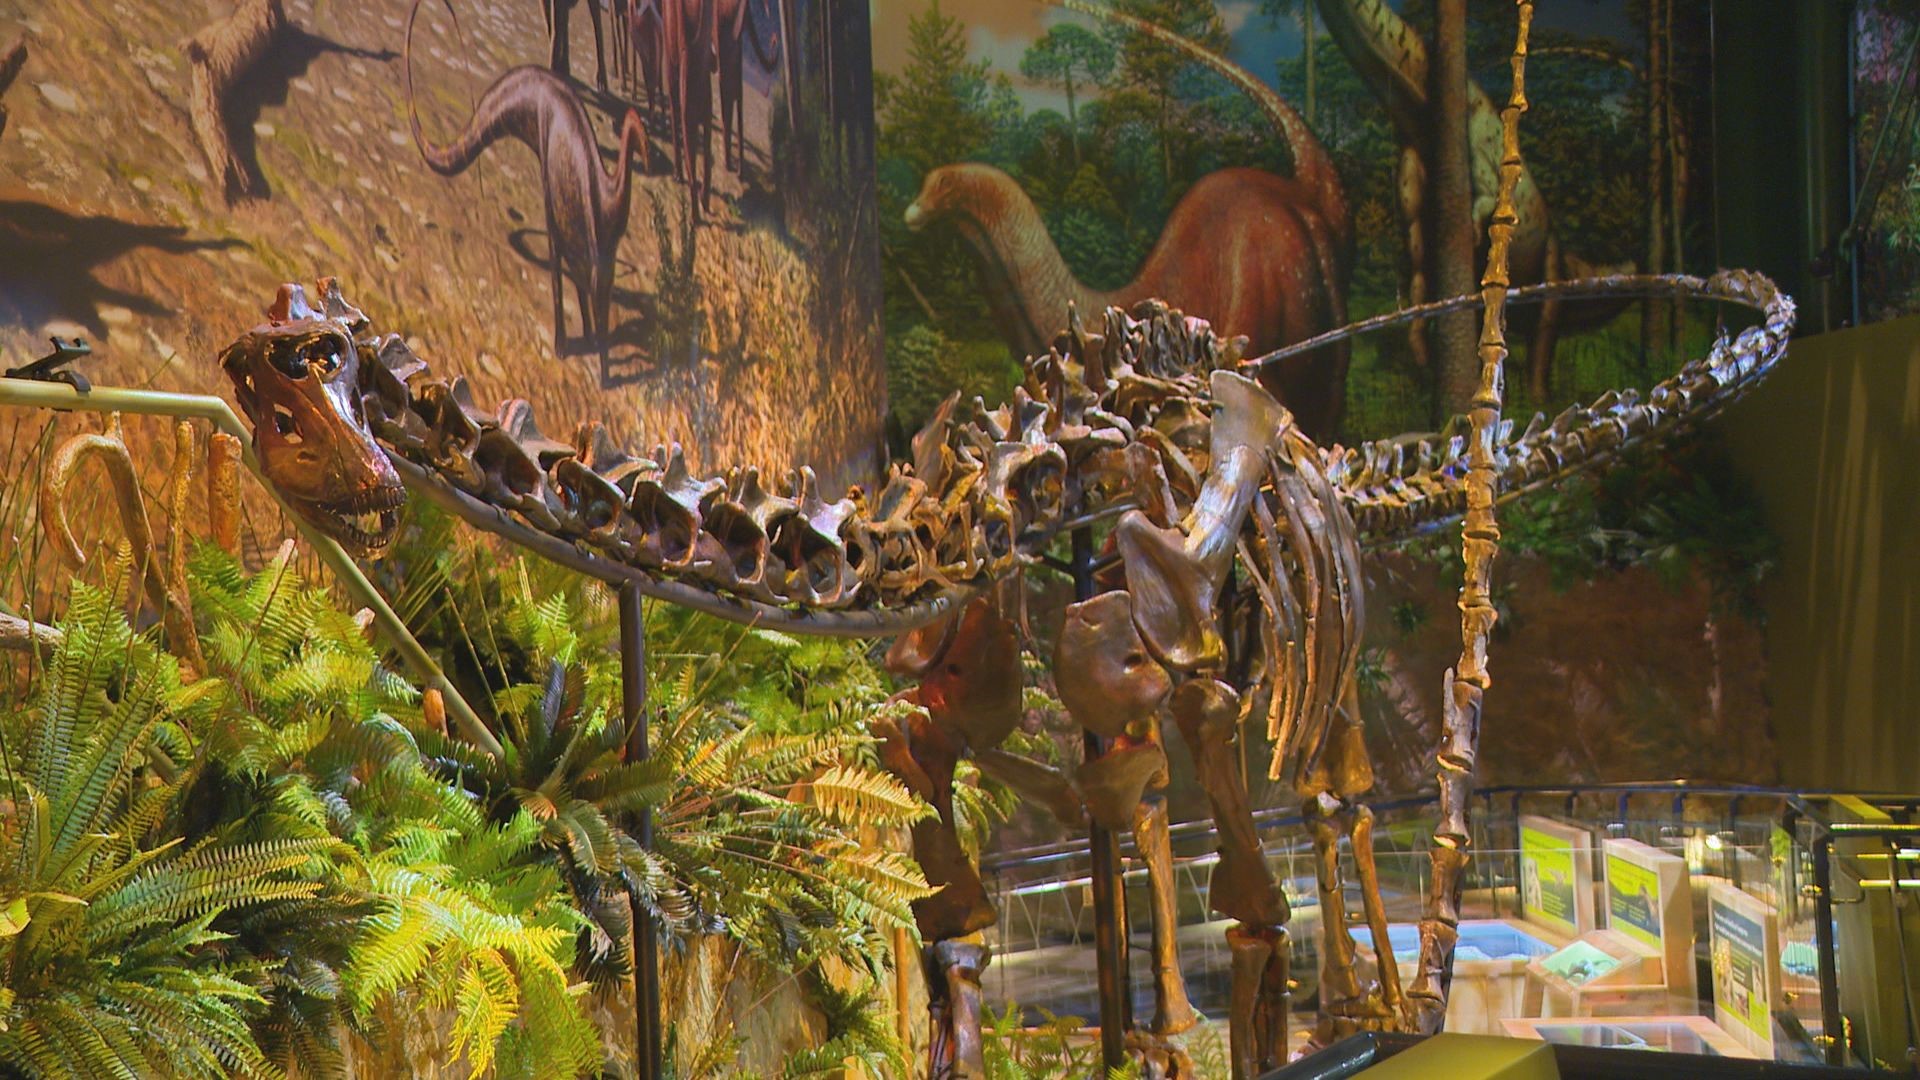 The new exhibit features plenty of hands-on experiences to help kids learn about the dinosaurs they are seeing.